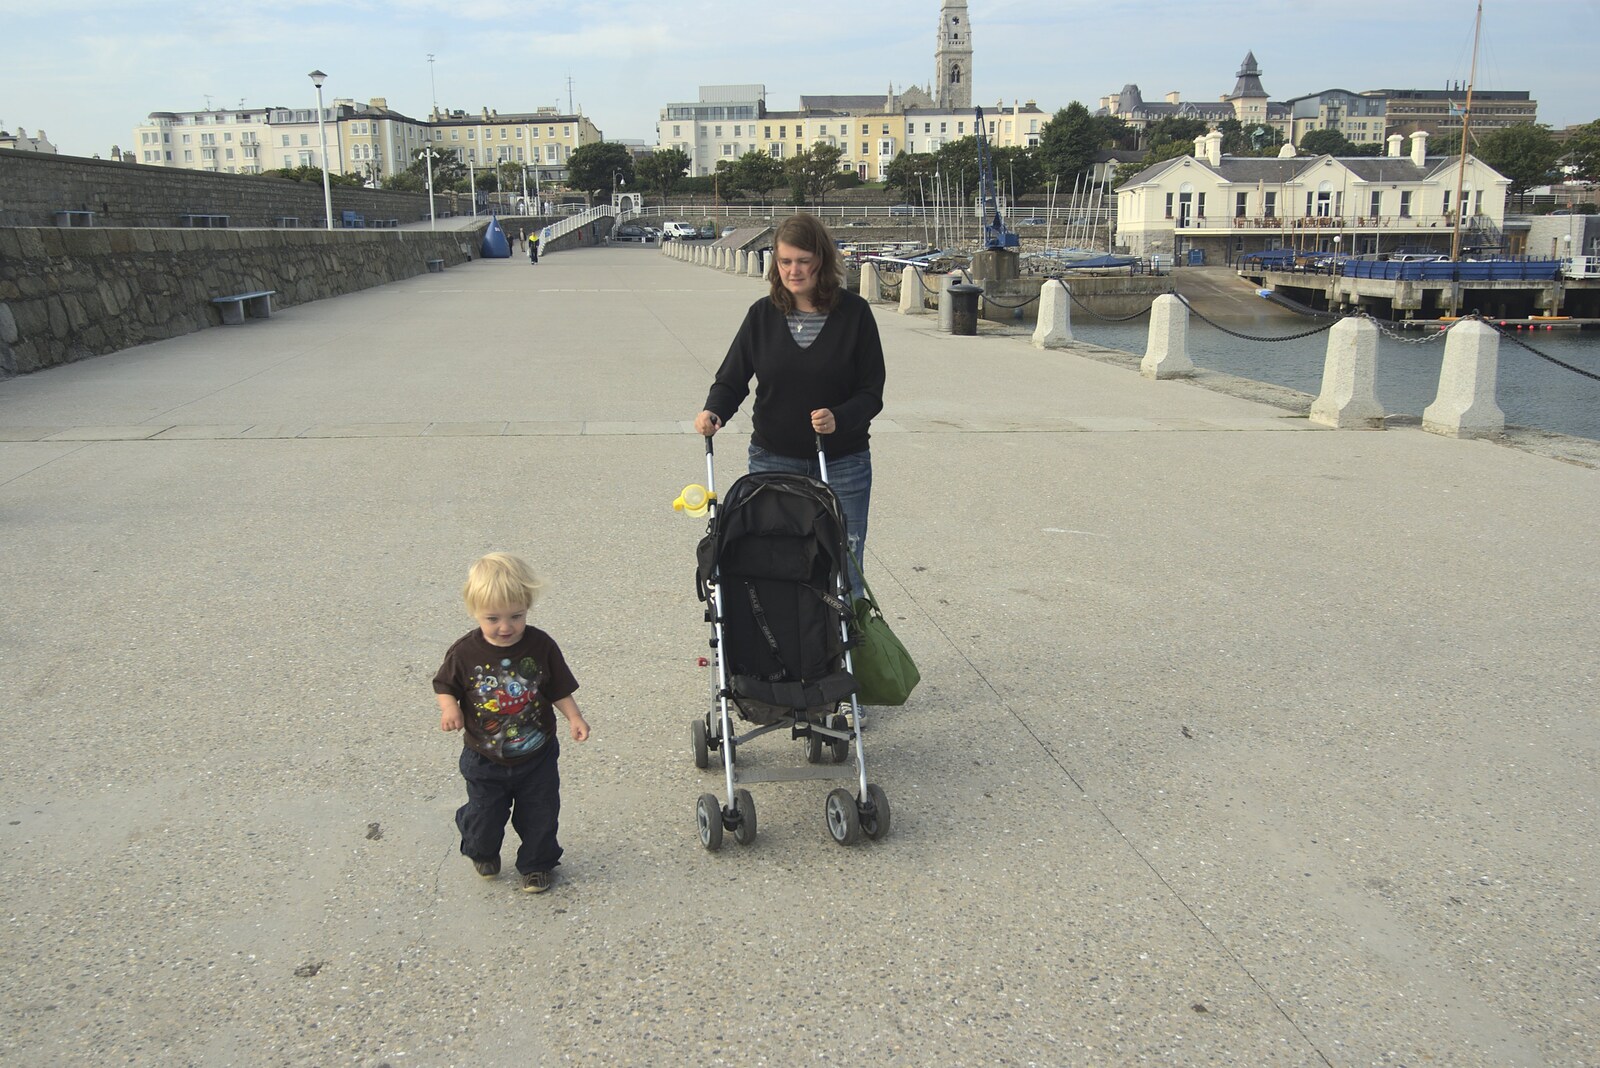 A Day in Dun Laoghaire, County Dublin, Ireland - 3rd September 2010: Fred and Isobel walk along the harbour wall